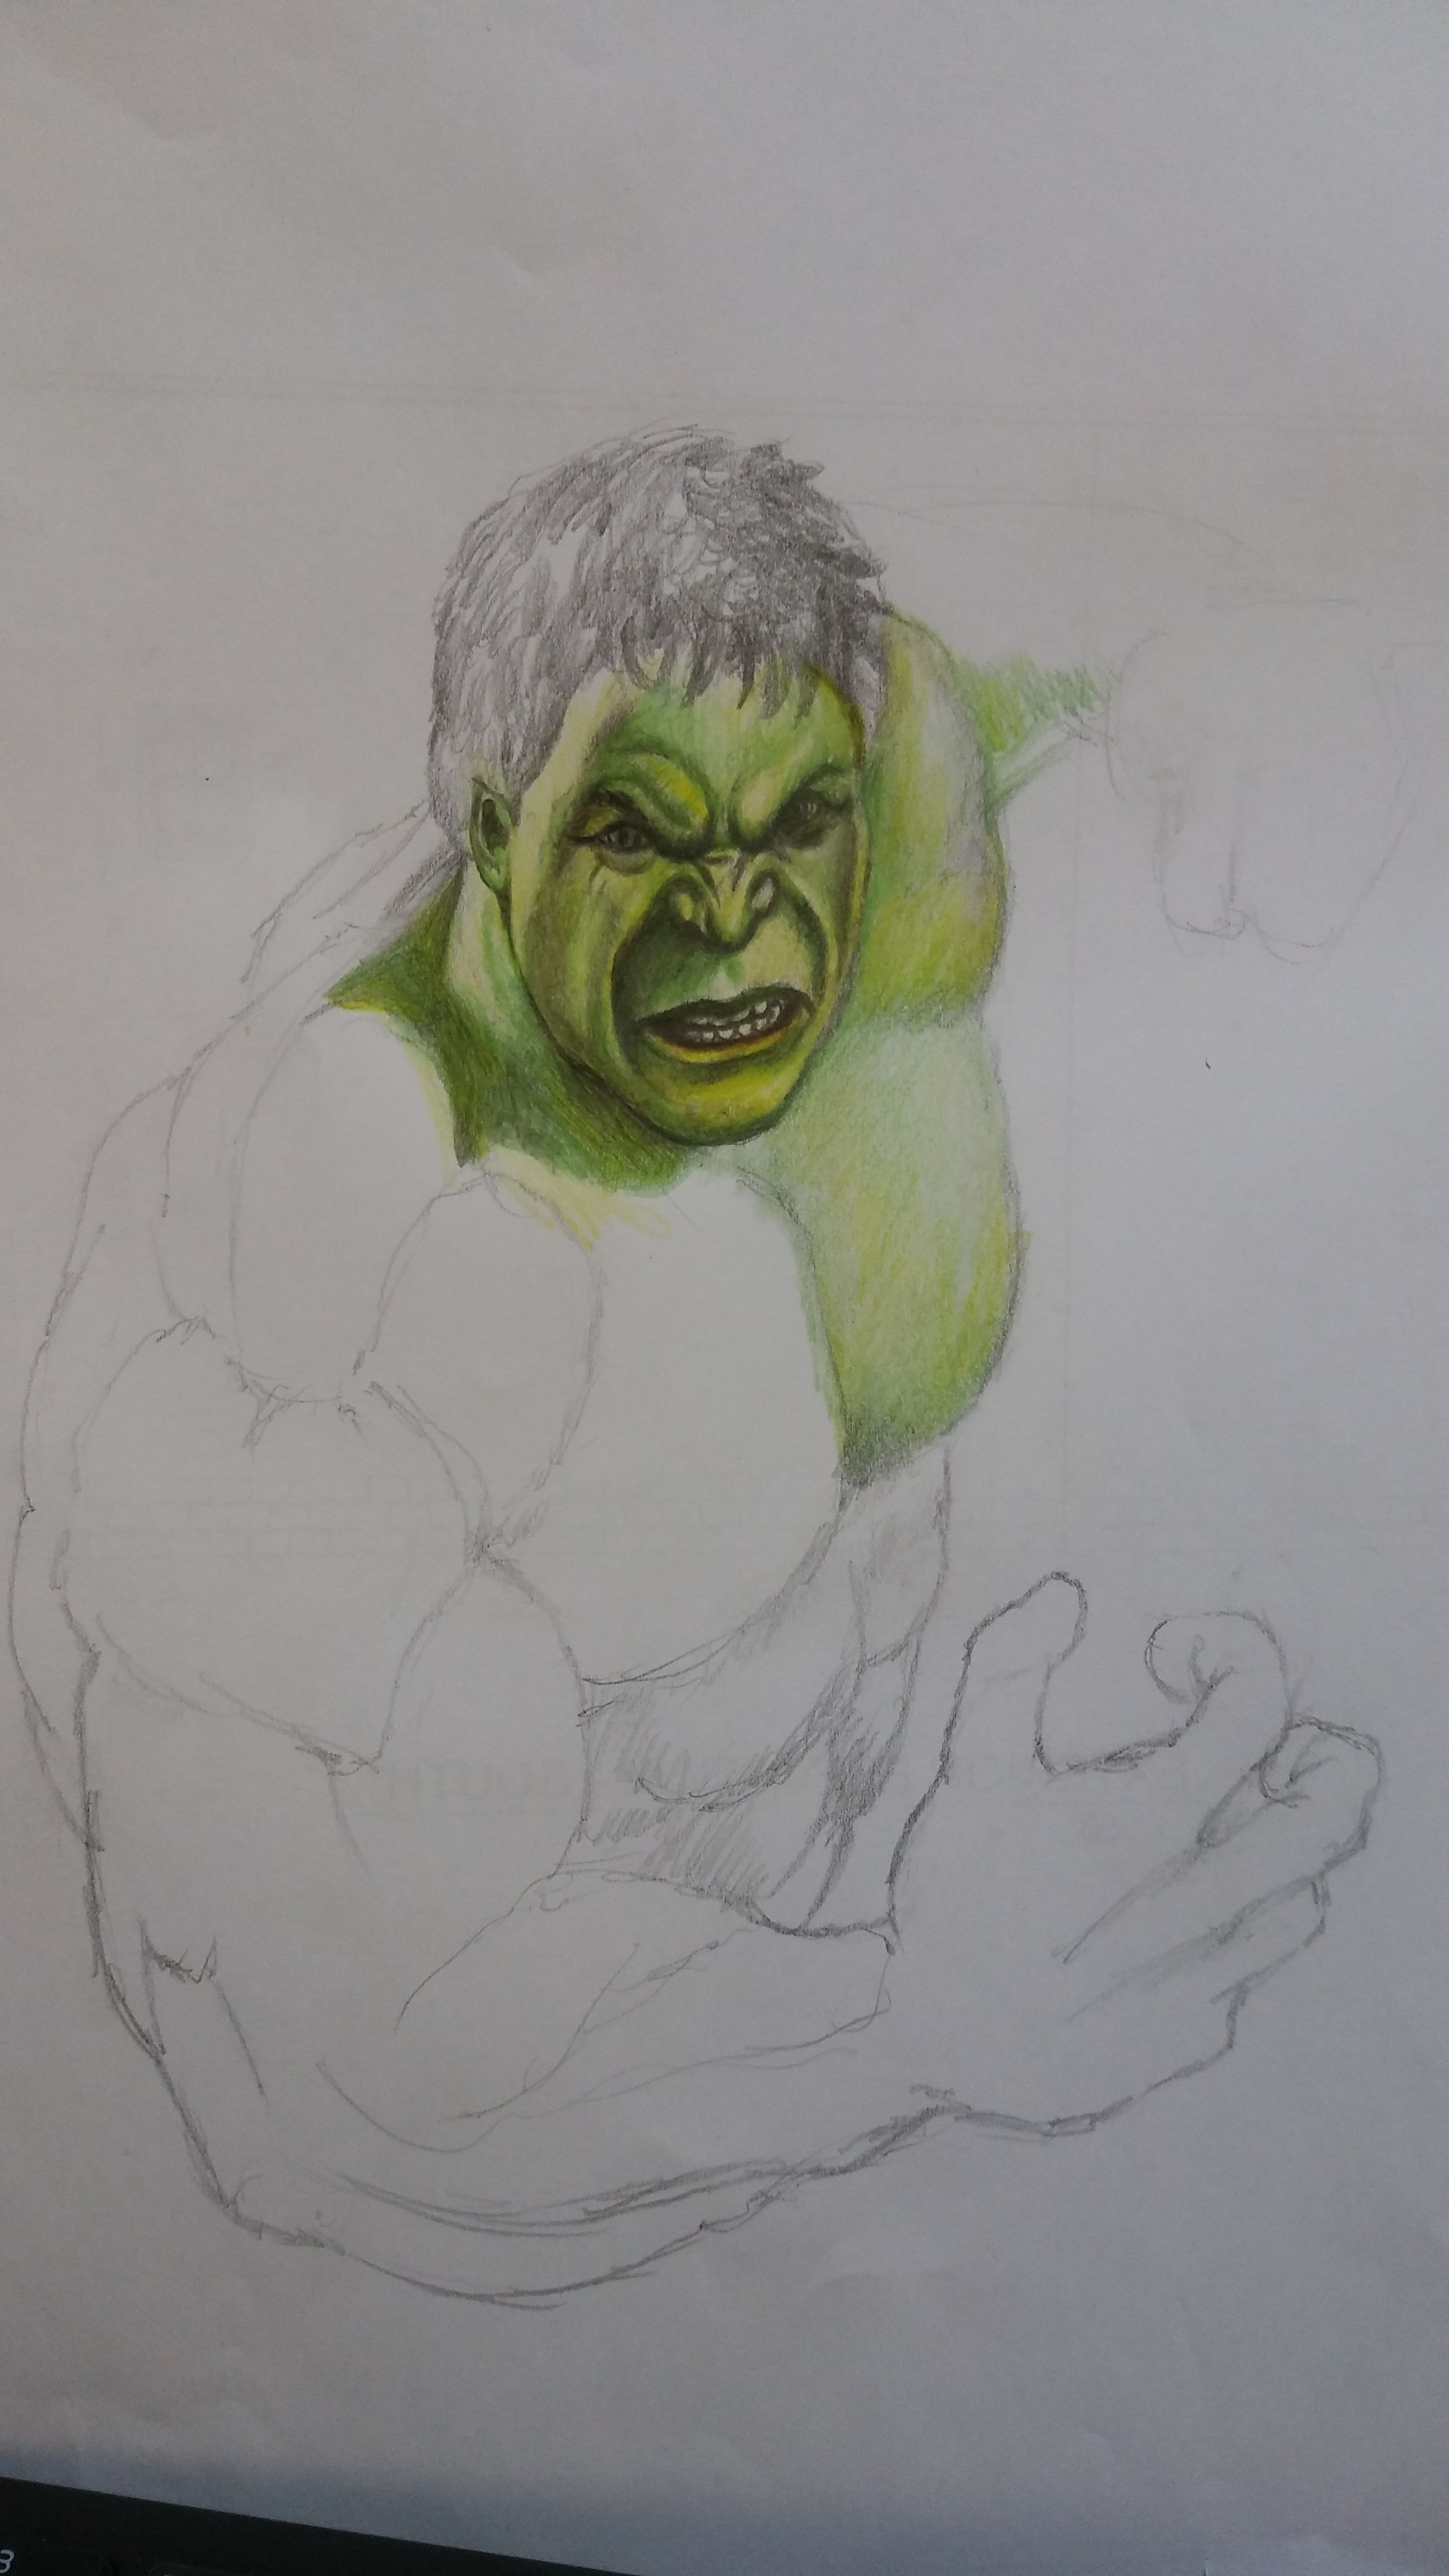 Hulk - pencil drawing by andrehfs on DeviantArt